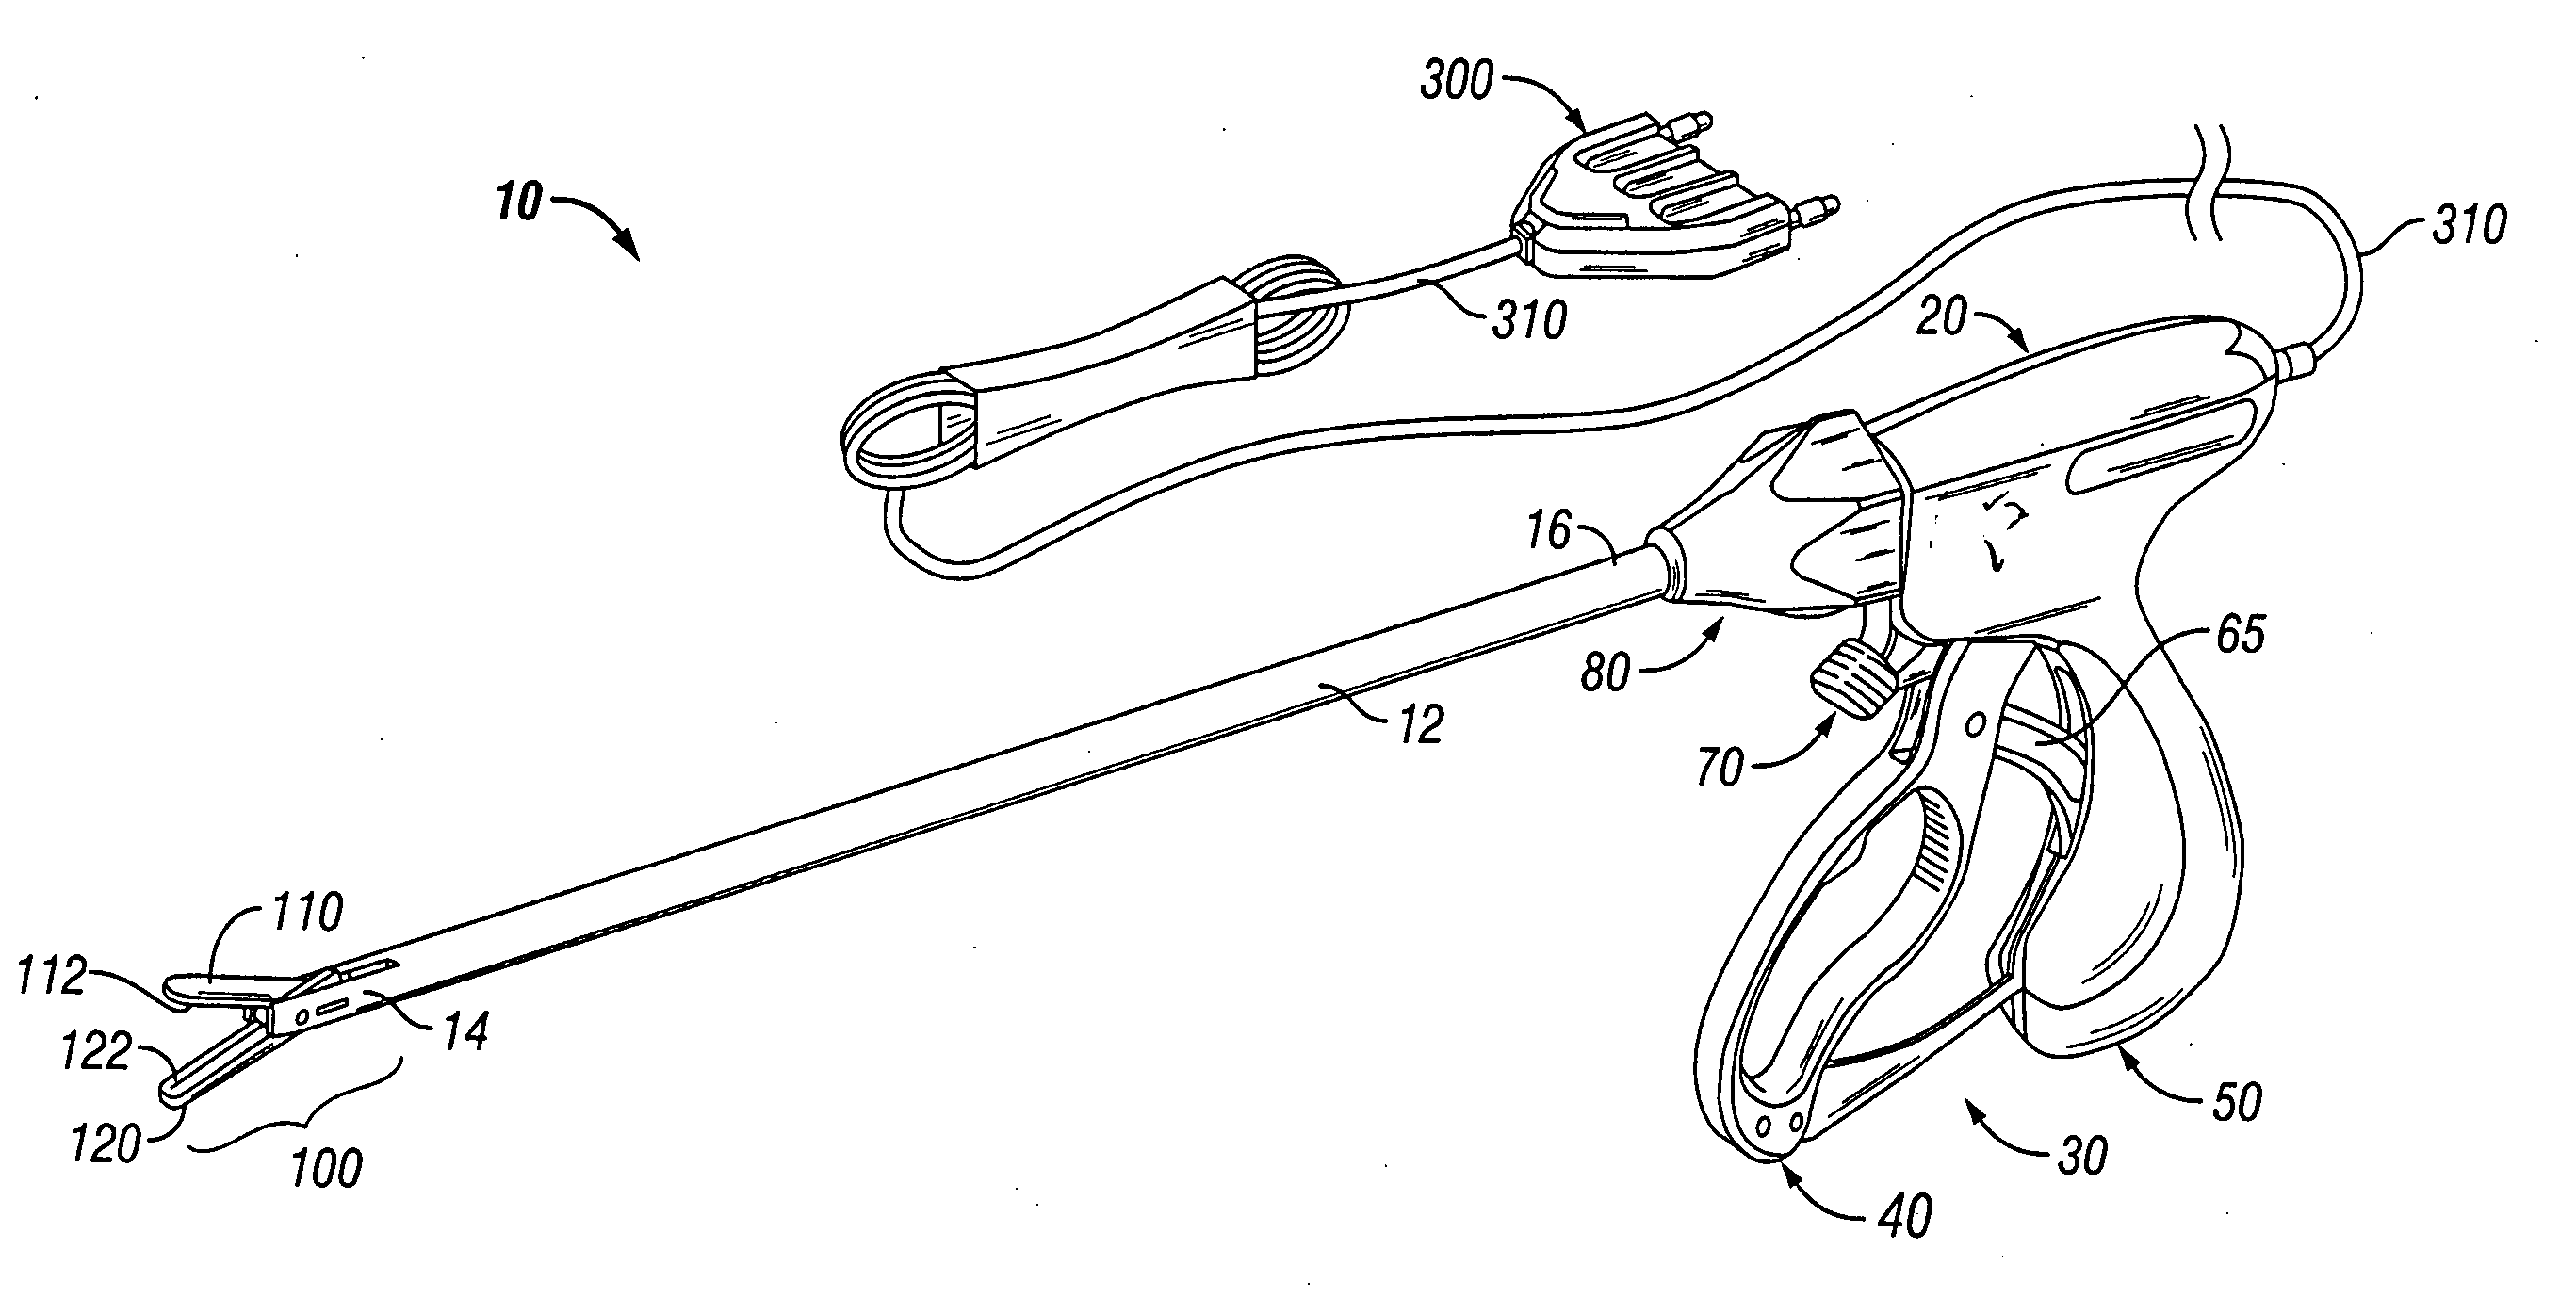 Electrosurgical instrument that directs energy delivery and protects adjacent tissue